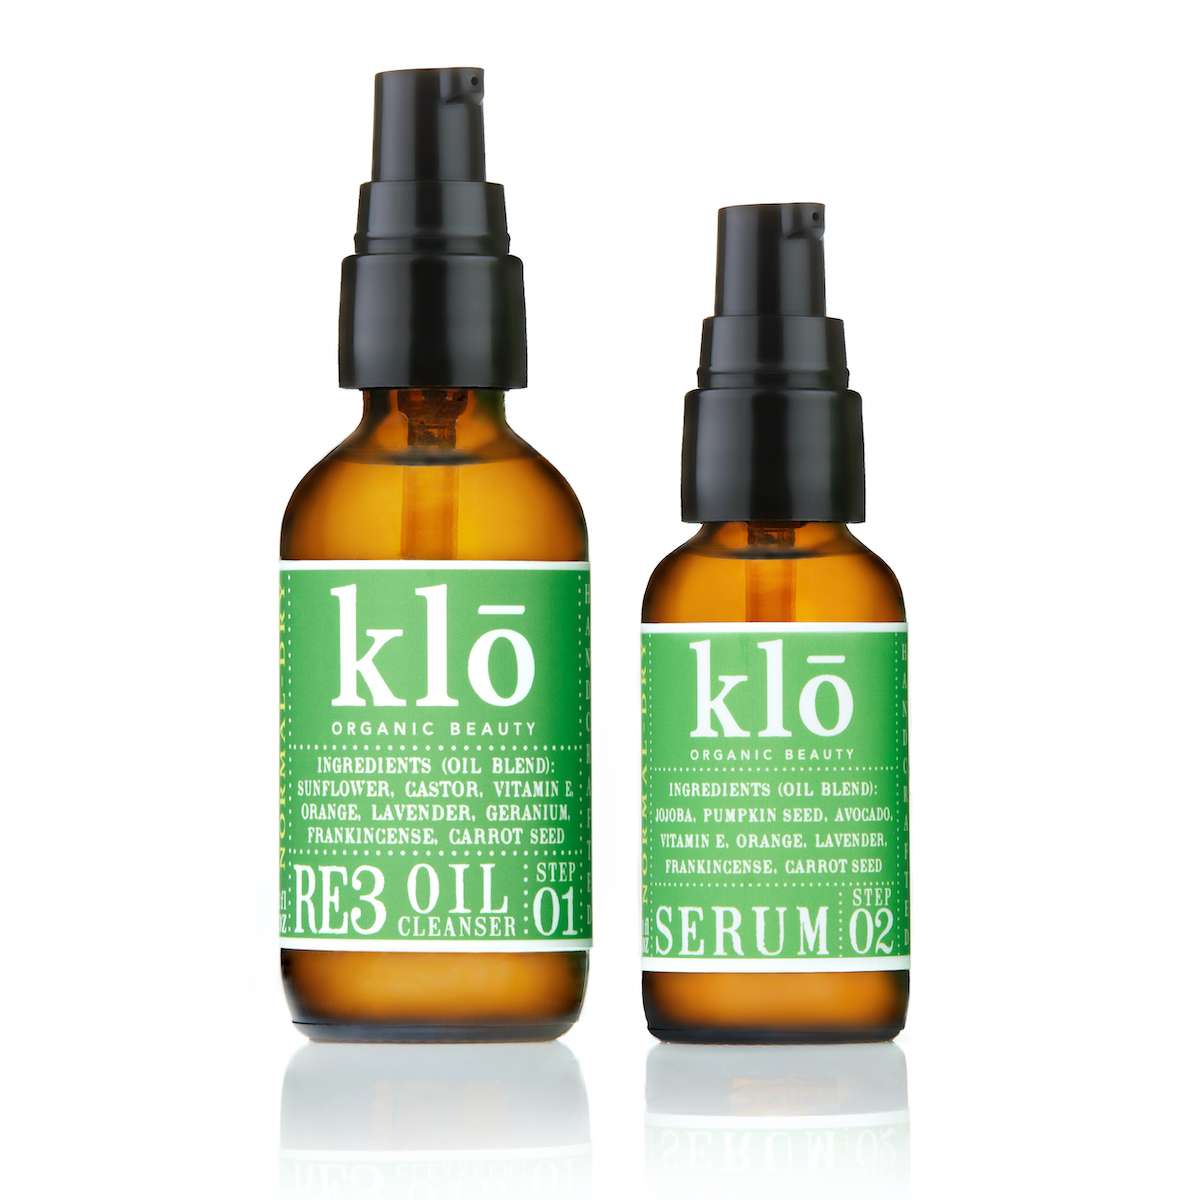 Klo Organic Beauty RE3 oil cleanser and serum bottles.